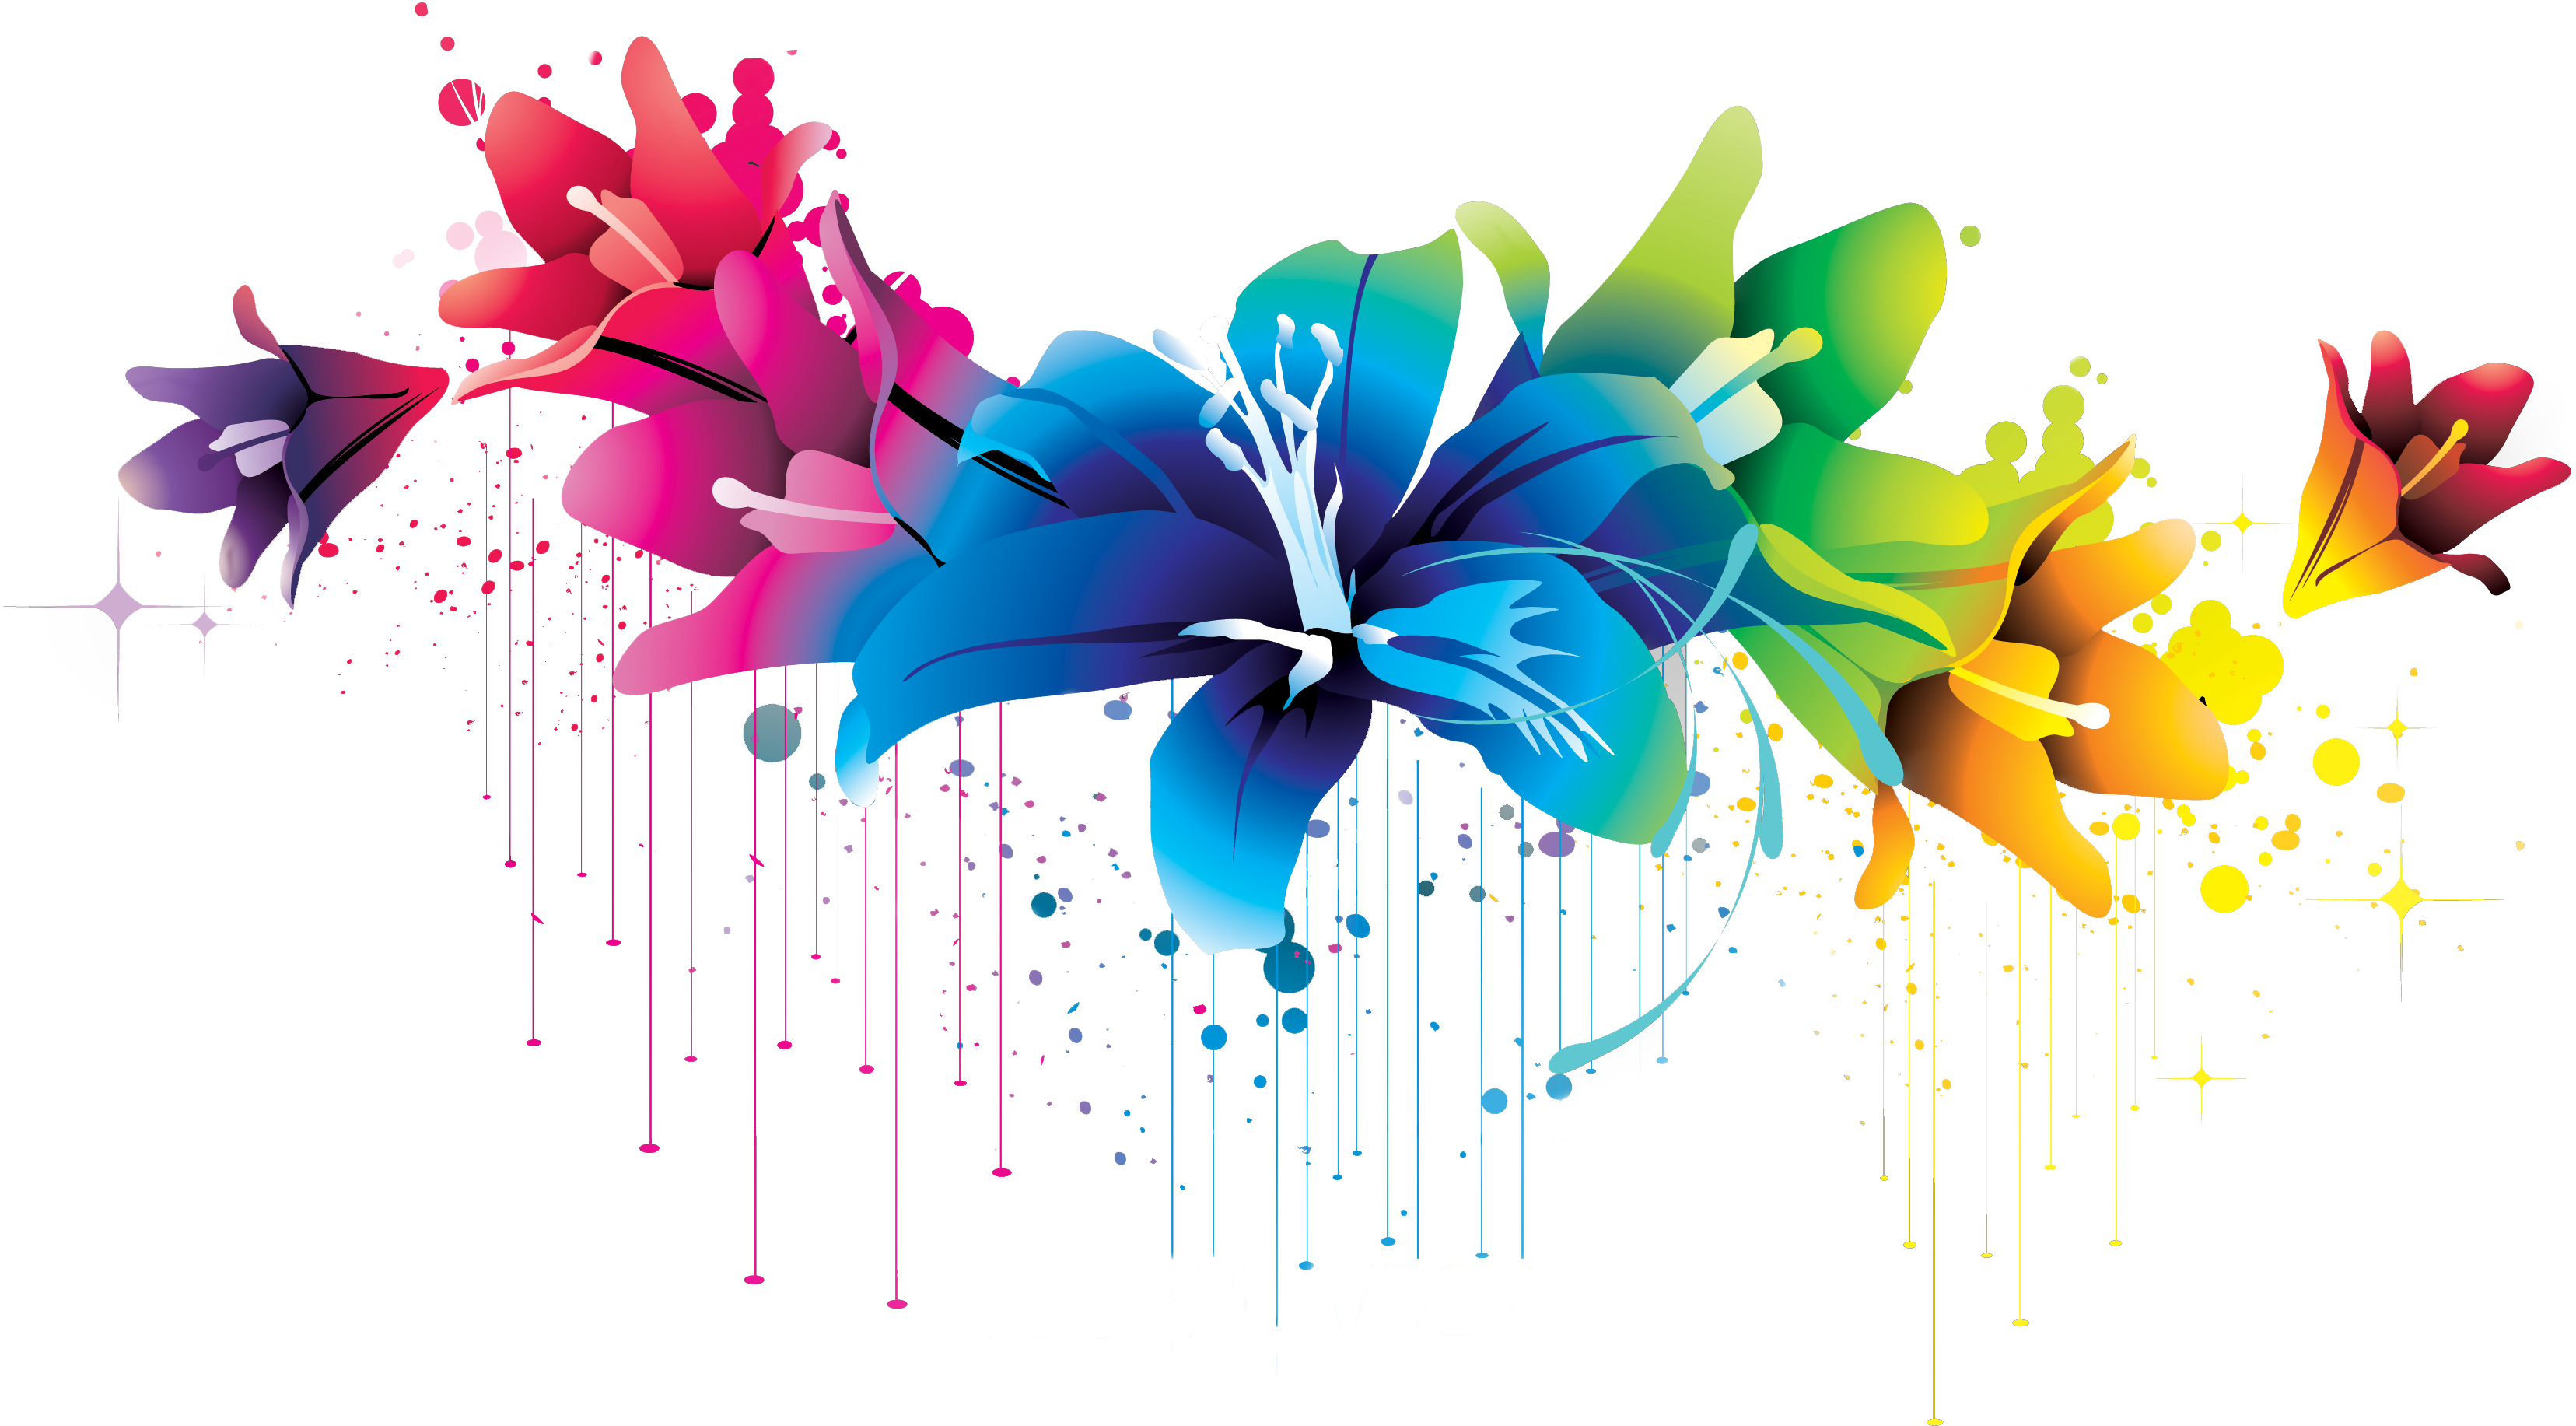 Flowers Pictures Free Download Transparent Png Images Free Transparent Png Logos